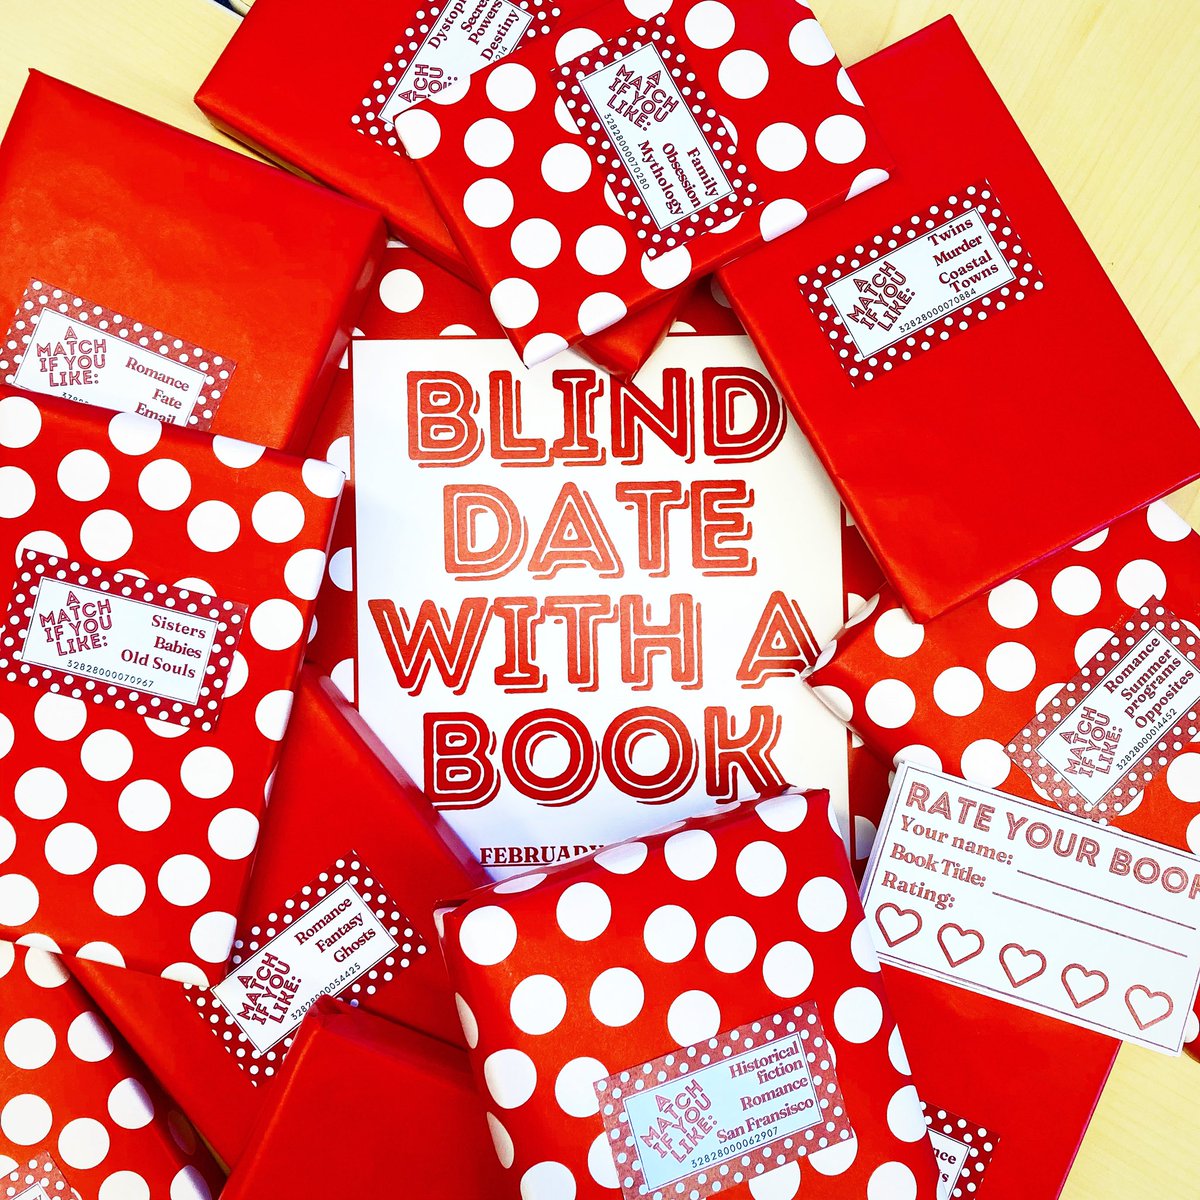 Blind Date with a Book kicks off today!! Take a chance & check out one of these wrapped books! The more you read, the more chances to win the candy raffle prize! #blinddatewithabook #book #books #february #valentines #valentinesday #love #lovebooks #lovereading #libraryprogram